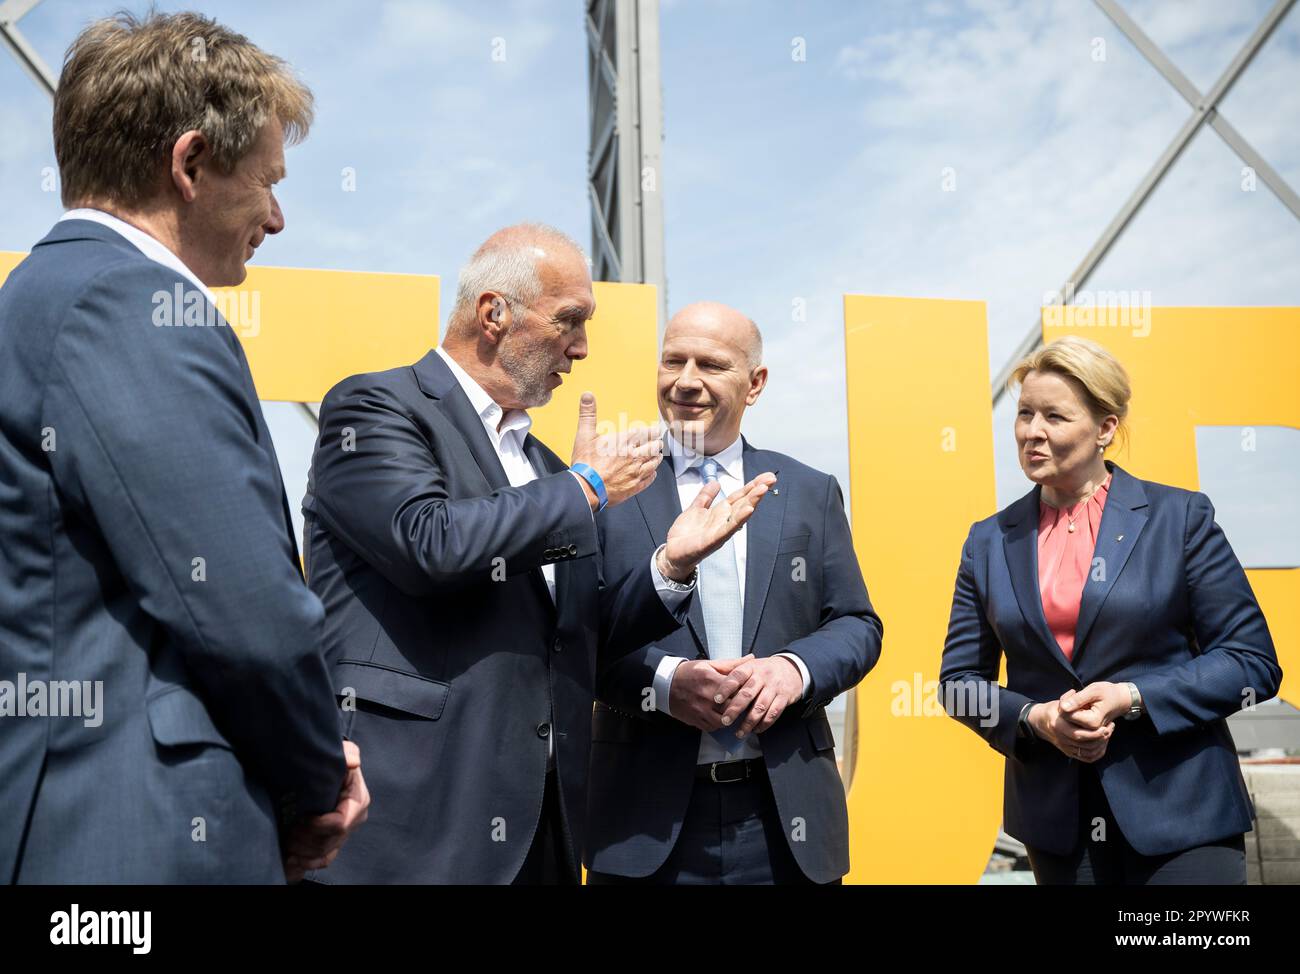 05 May 2023, Berlin: Richard Lutz (l-r), Member of the Board of Deutsche Bahn AG, Reinhard Müller, Member of the Board of EUREF AG, Kai Wegner (CDU), Governing Mayor of Berlin, and Franziska Giffey (SPD), Berlin Senator for Economic Affairs, Energy and Operations, visit the construction site. The EUREF Campus Berlin celebrates topping-out ceremony in the Schöneberg gasometer on the occasion of the renovation in accordance with the preservation order. EUREF AG is a privately owned developer of energy and environmentally optimized real estate. Photo: Hannes P. Albert/dpa Stock Photo